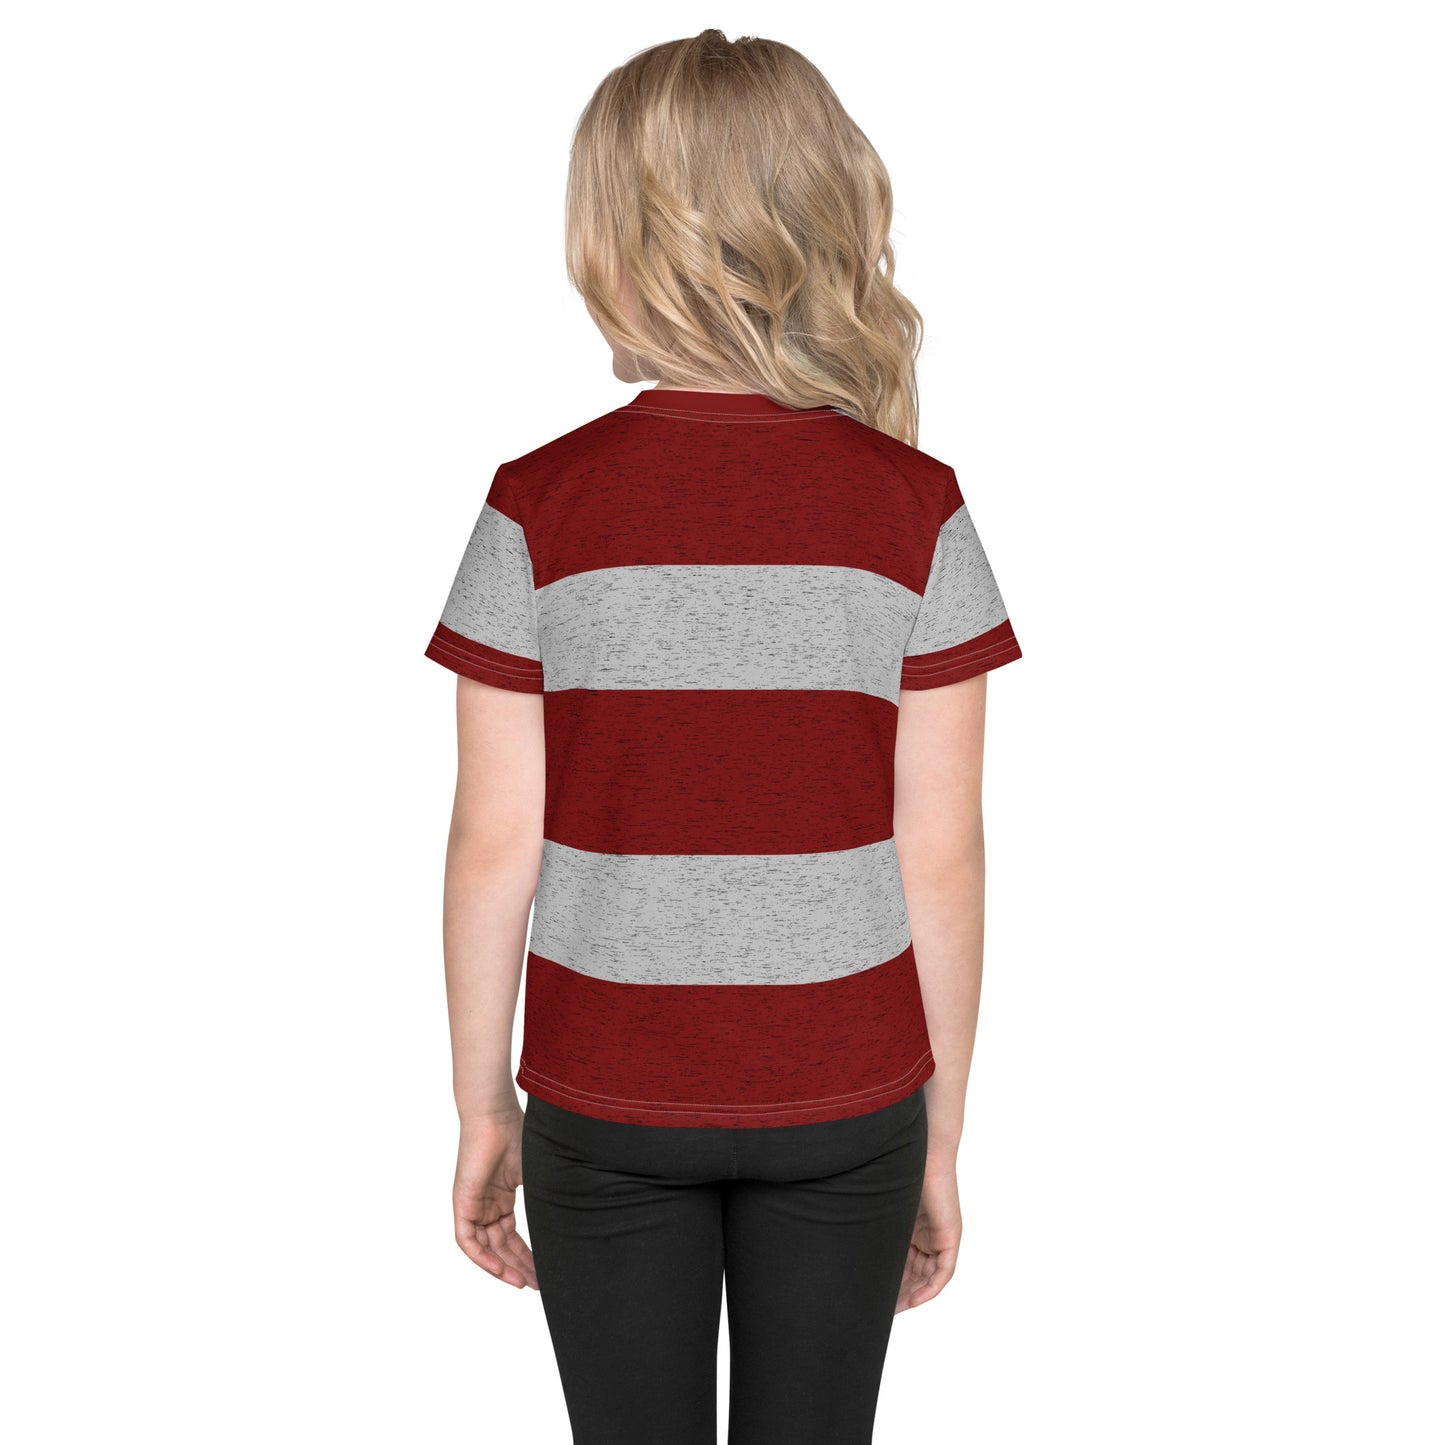 Mezzotint - Inspired By Taylor Swift - Sustainably Made Kids T-shirt